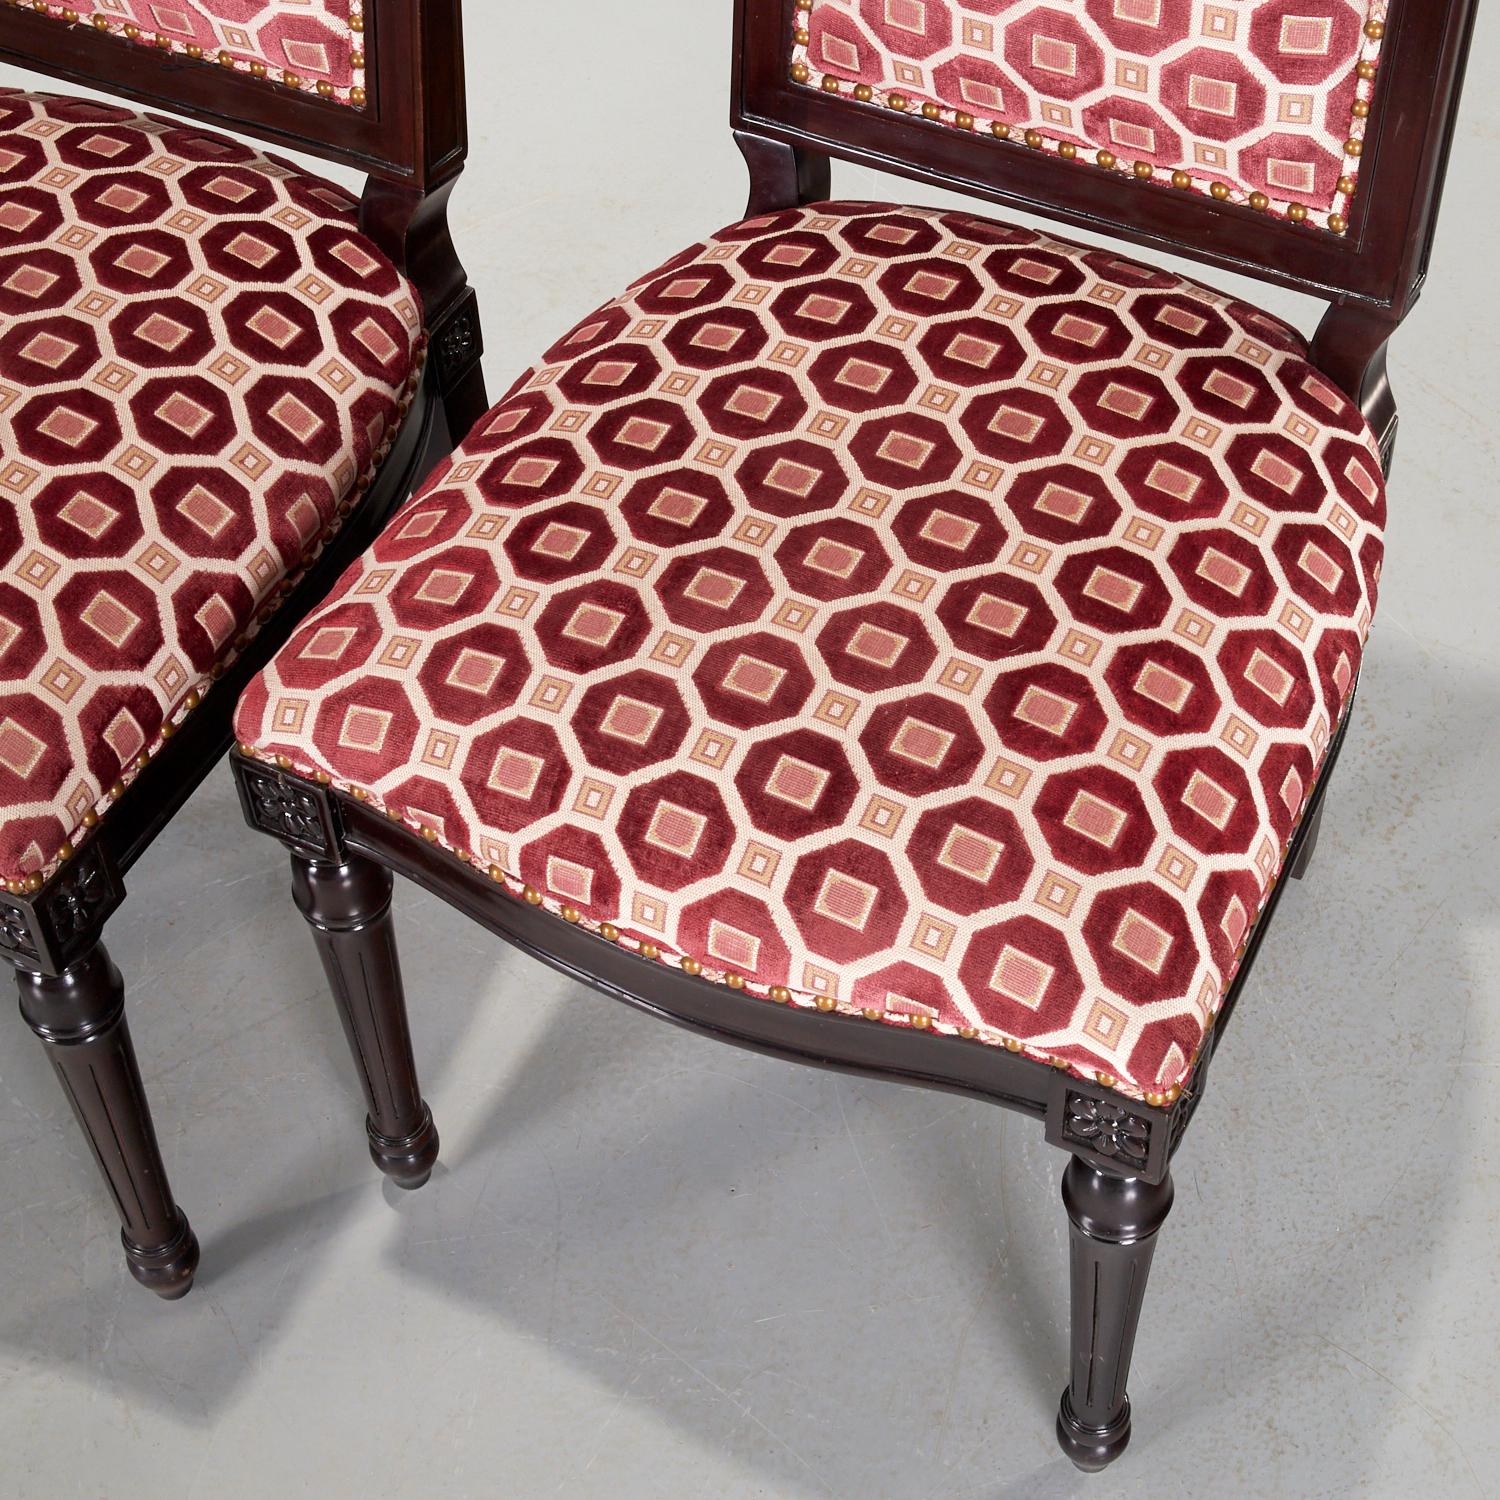 21st C., a pair of Oly side chairs with sculpted geometric pattern upholstery, nailhead trim, and lacquered hand carved hardwood frames. The upholstery is in a raspberry red colorway with hints of beige and pink on a cream ground. The side welting